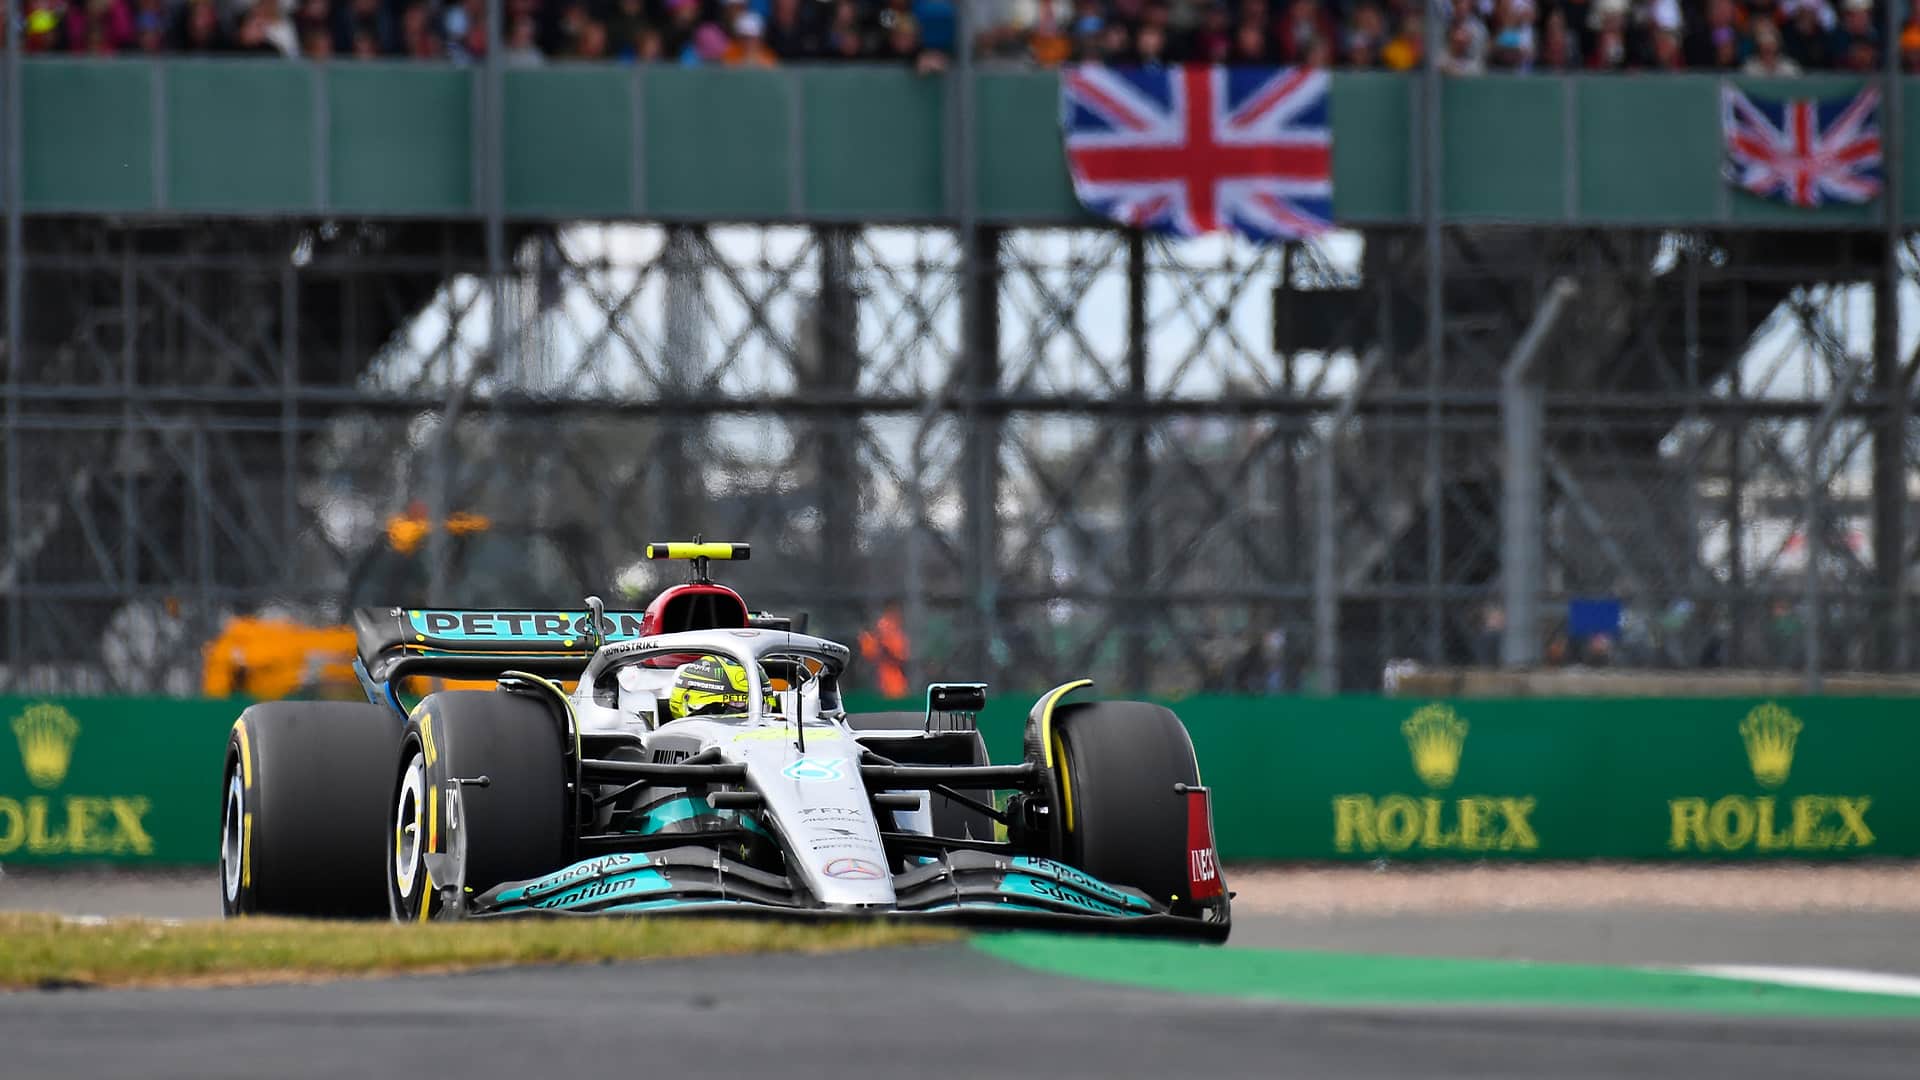 f1 silverstone live streaming